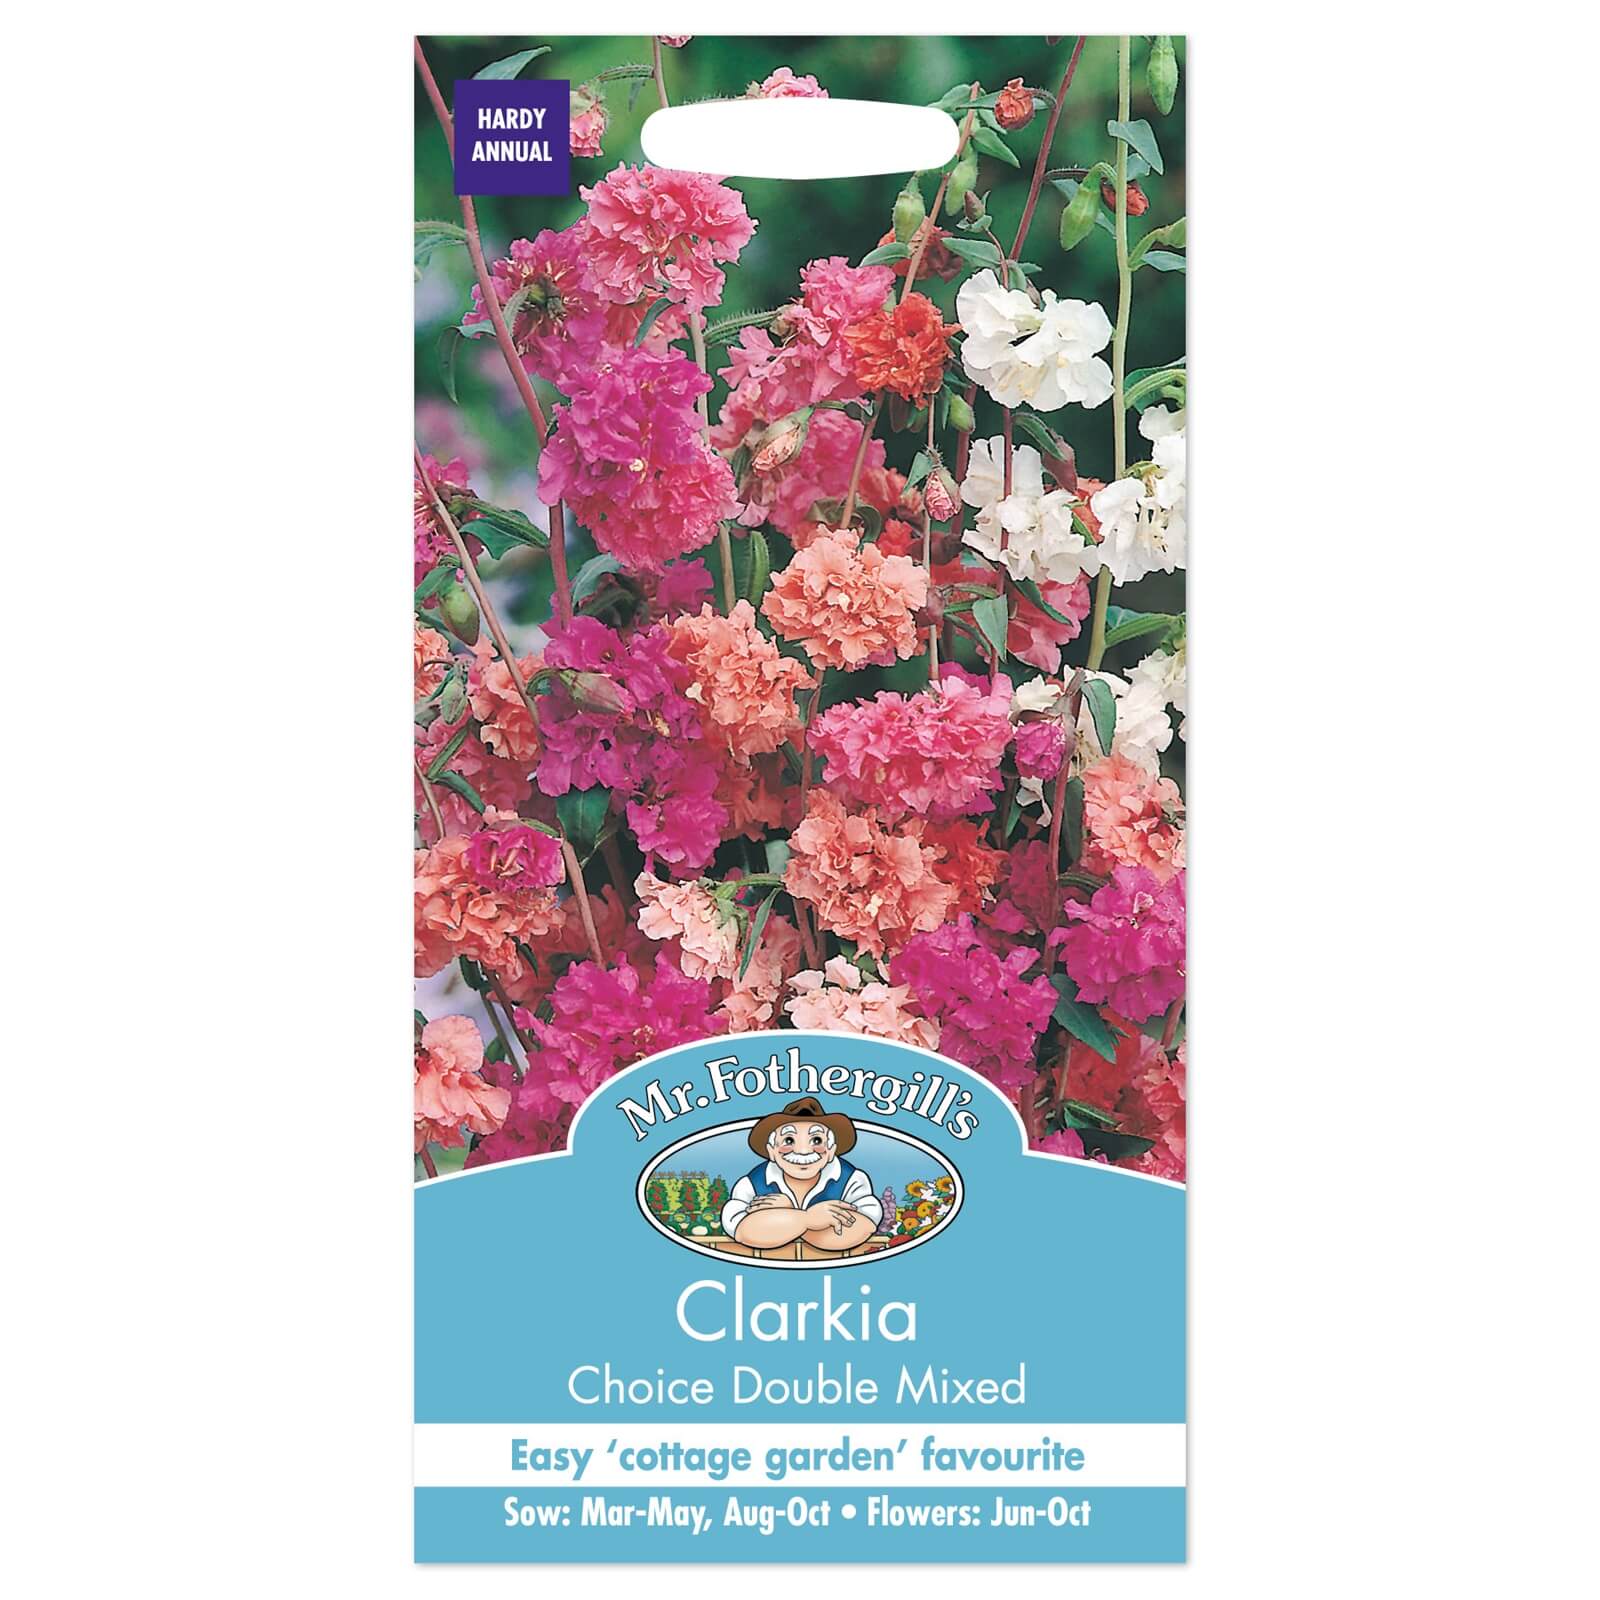 Mr. Fothergill's Clarkia Choice Double Mixed Seeds